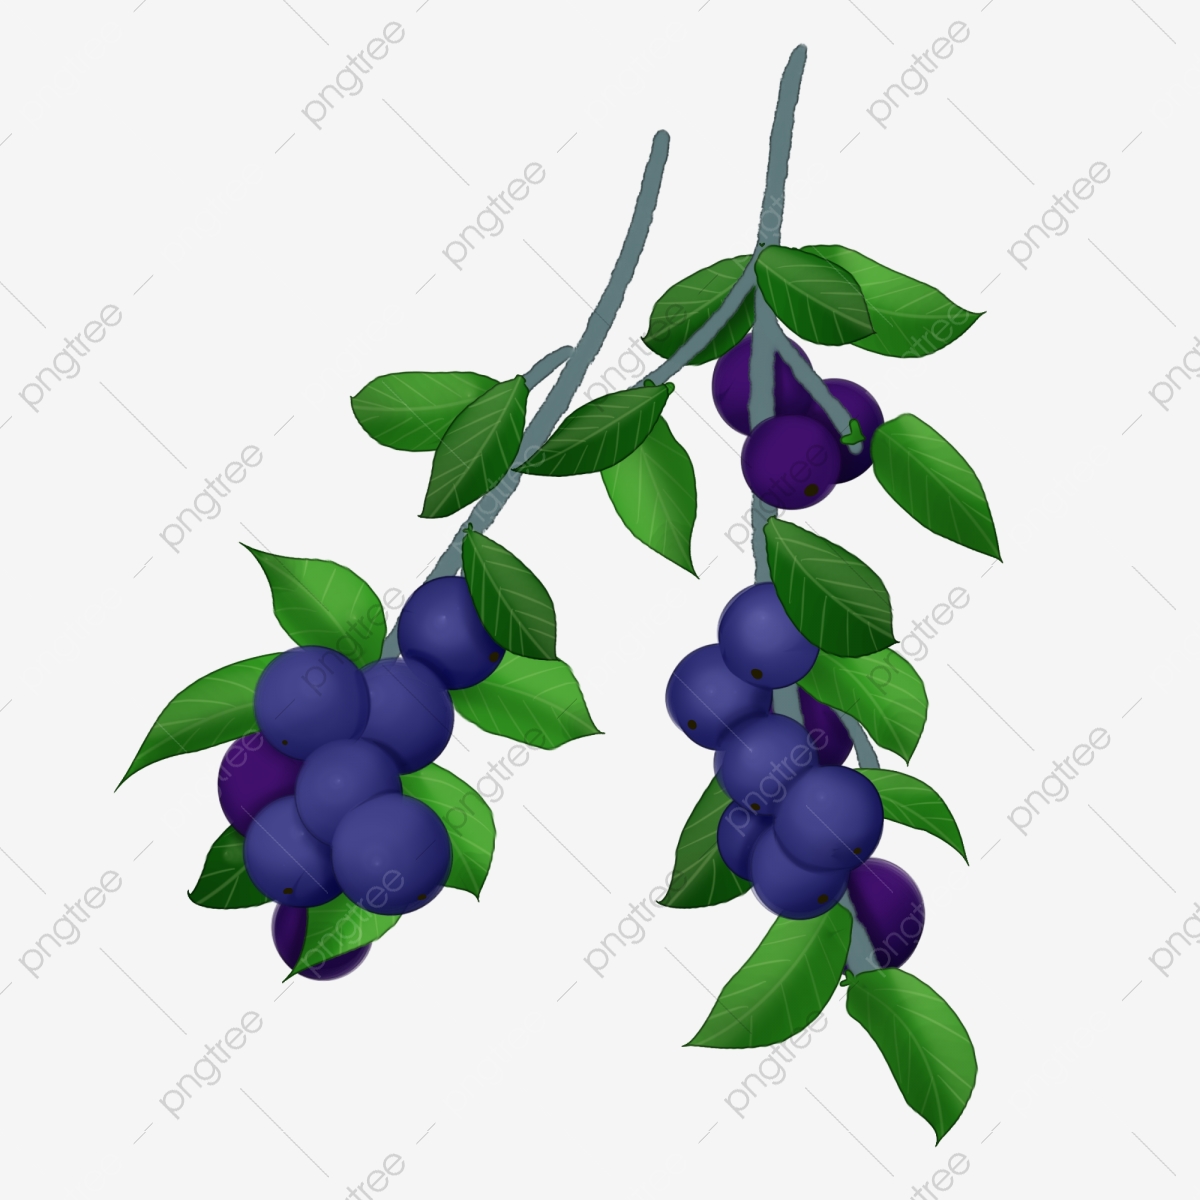 Hand drawn bunches of. Blueberry clipart two